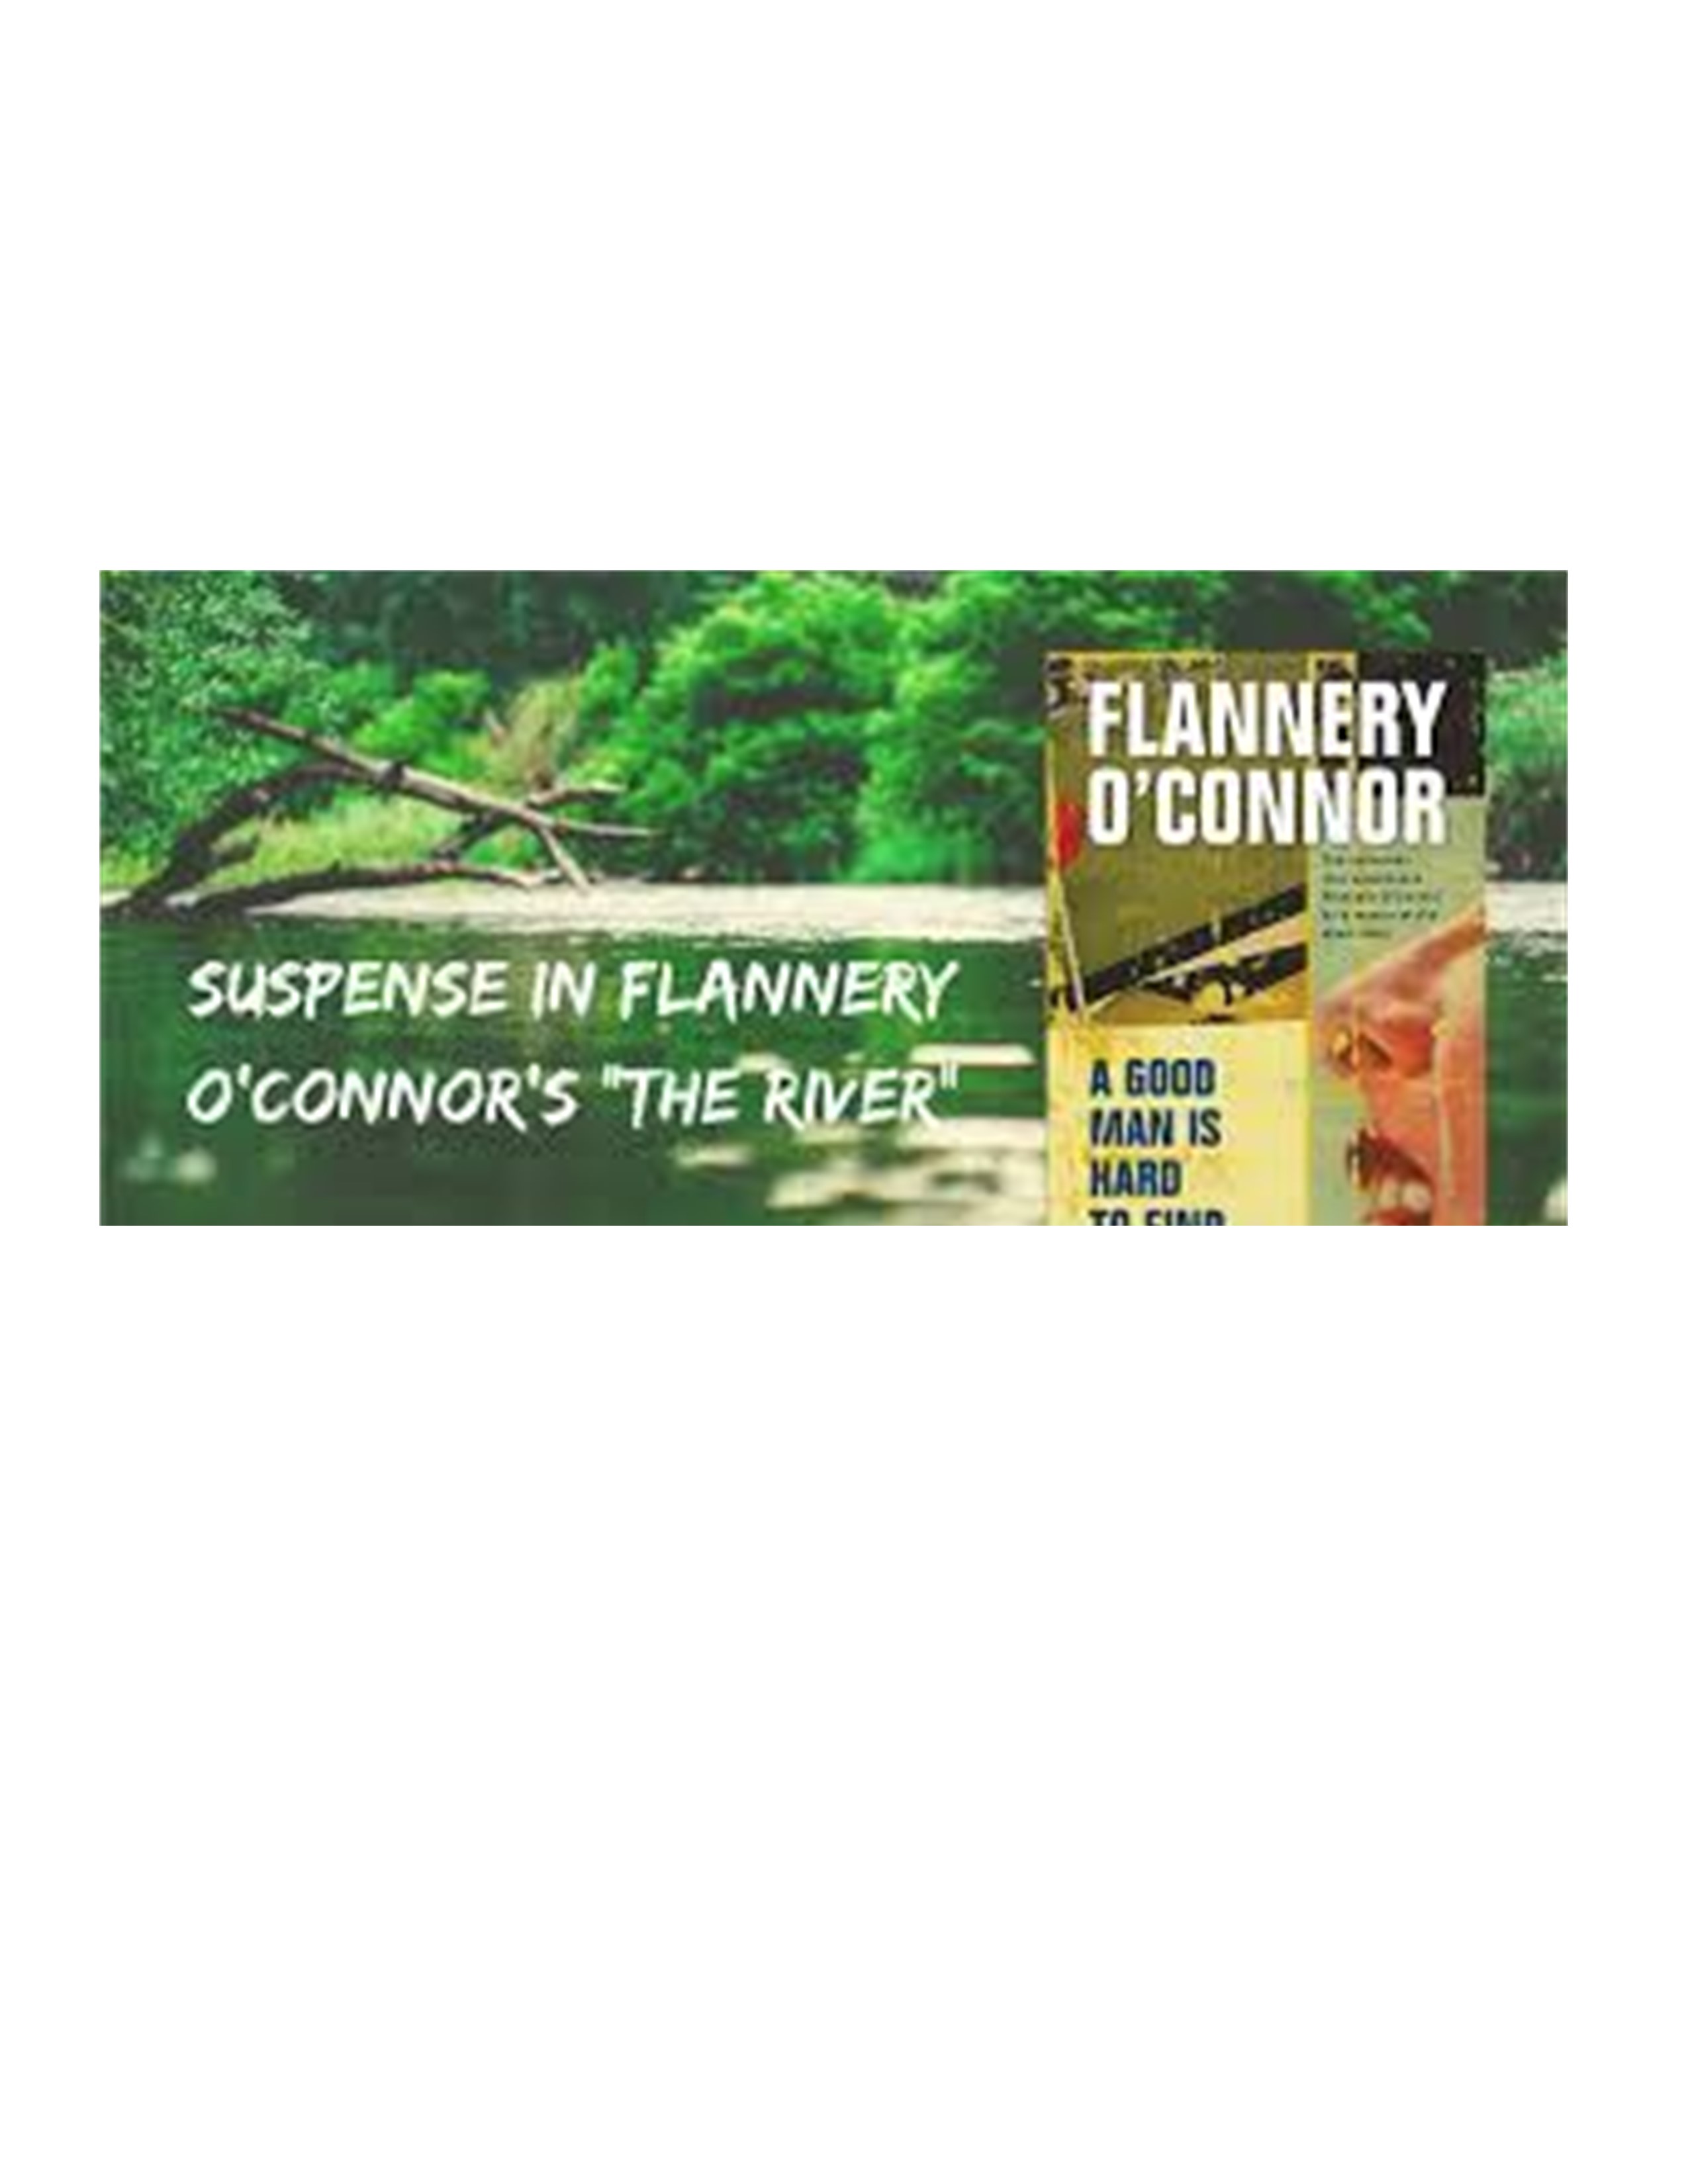 image of a river and O'Connor's book